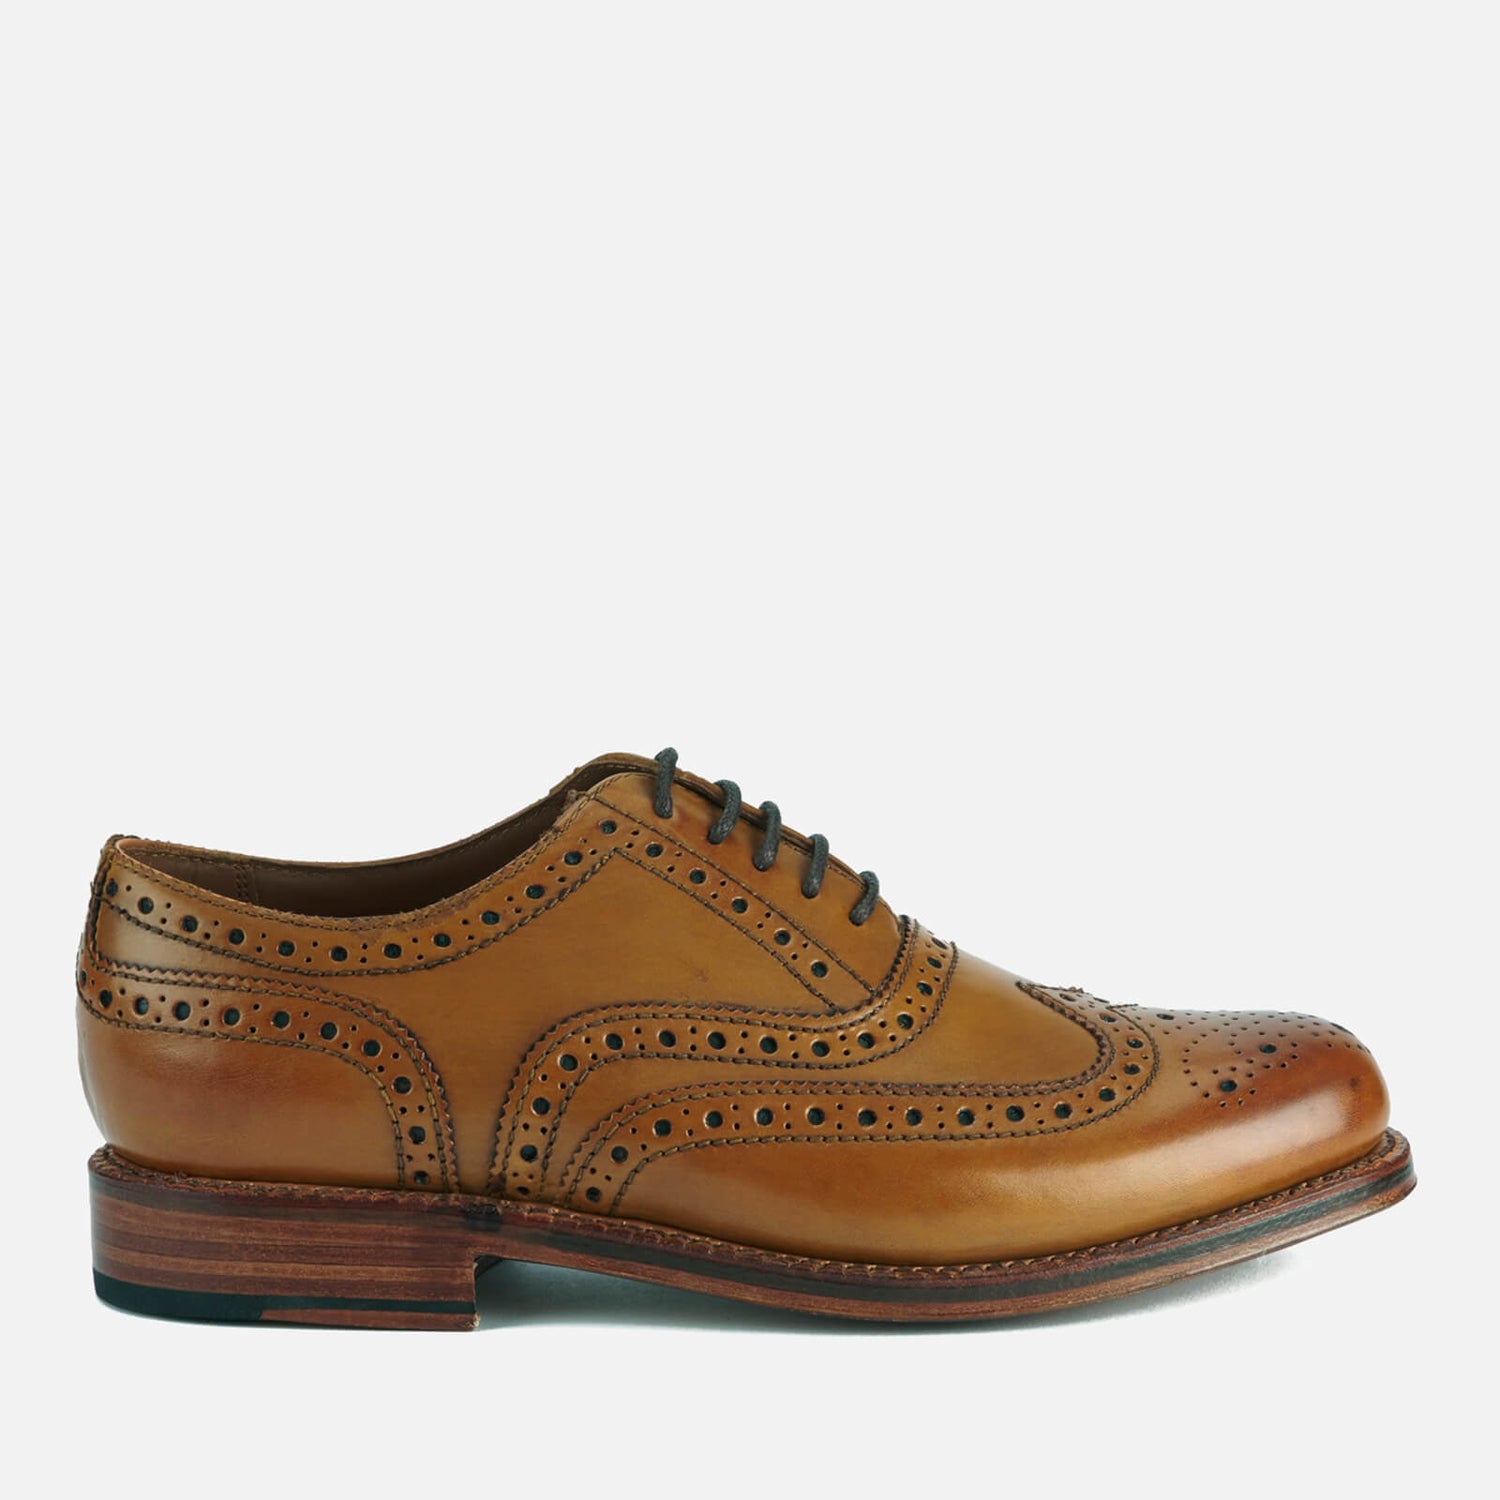 Grenson Men's Stanley Leather Brogues - Tan Calf - Free UK Delivery ...